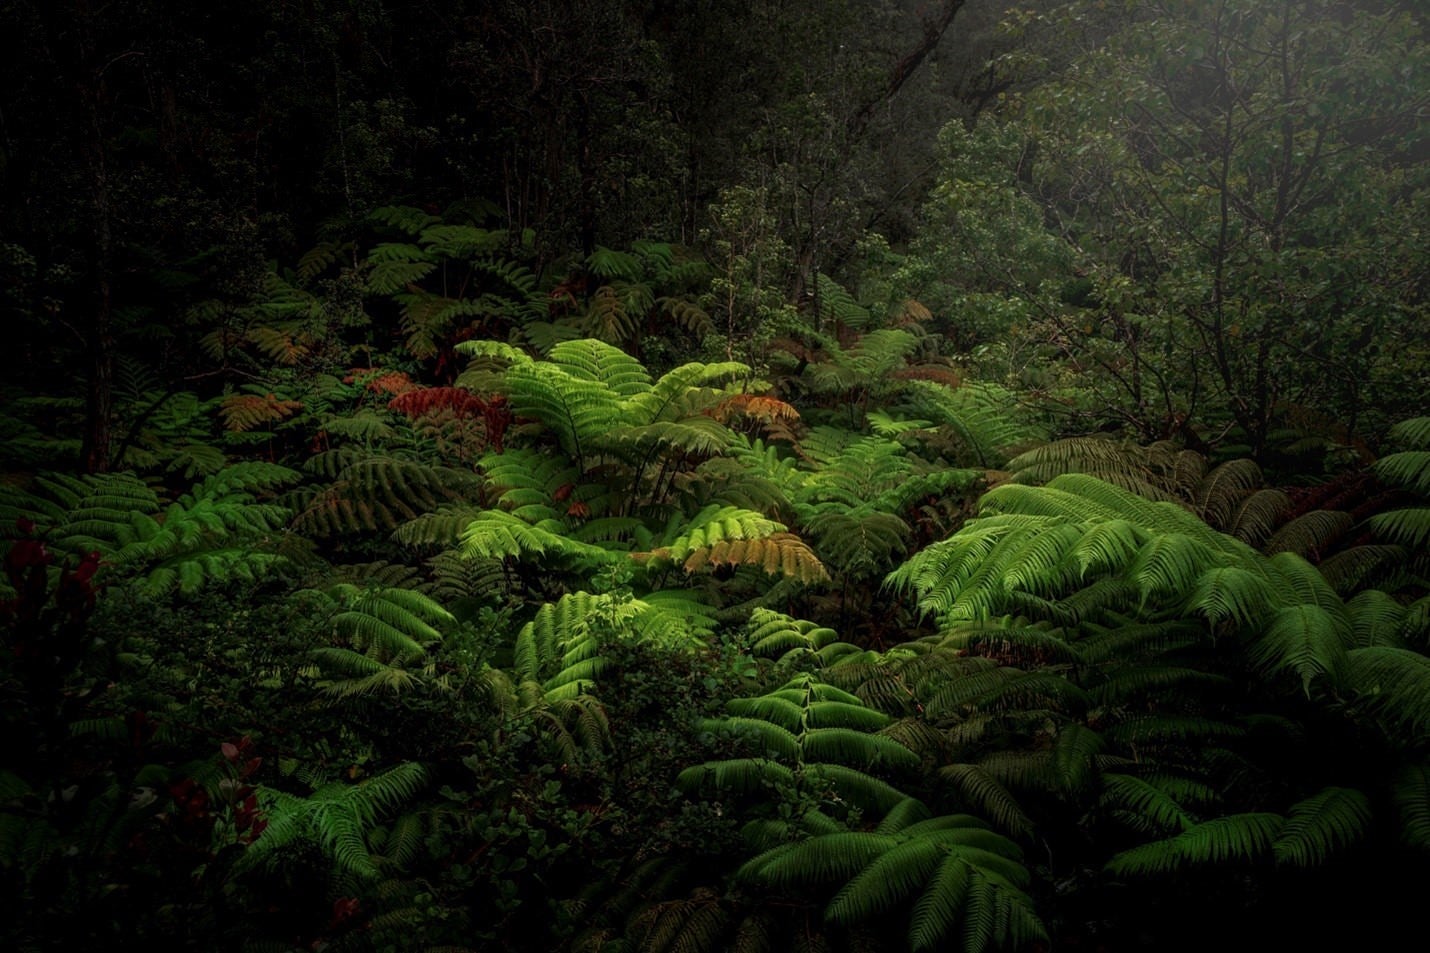 “Enigmatic whispers in the ancient woods of Hawaiʻi Volcanoes National Park, Hawaii.” Photo by Raj Bose. Sony Alpha 7R V. Sony 16-35mm f/2.8 G Master. 1/25-sec., f/8, ISO 100